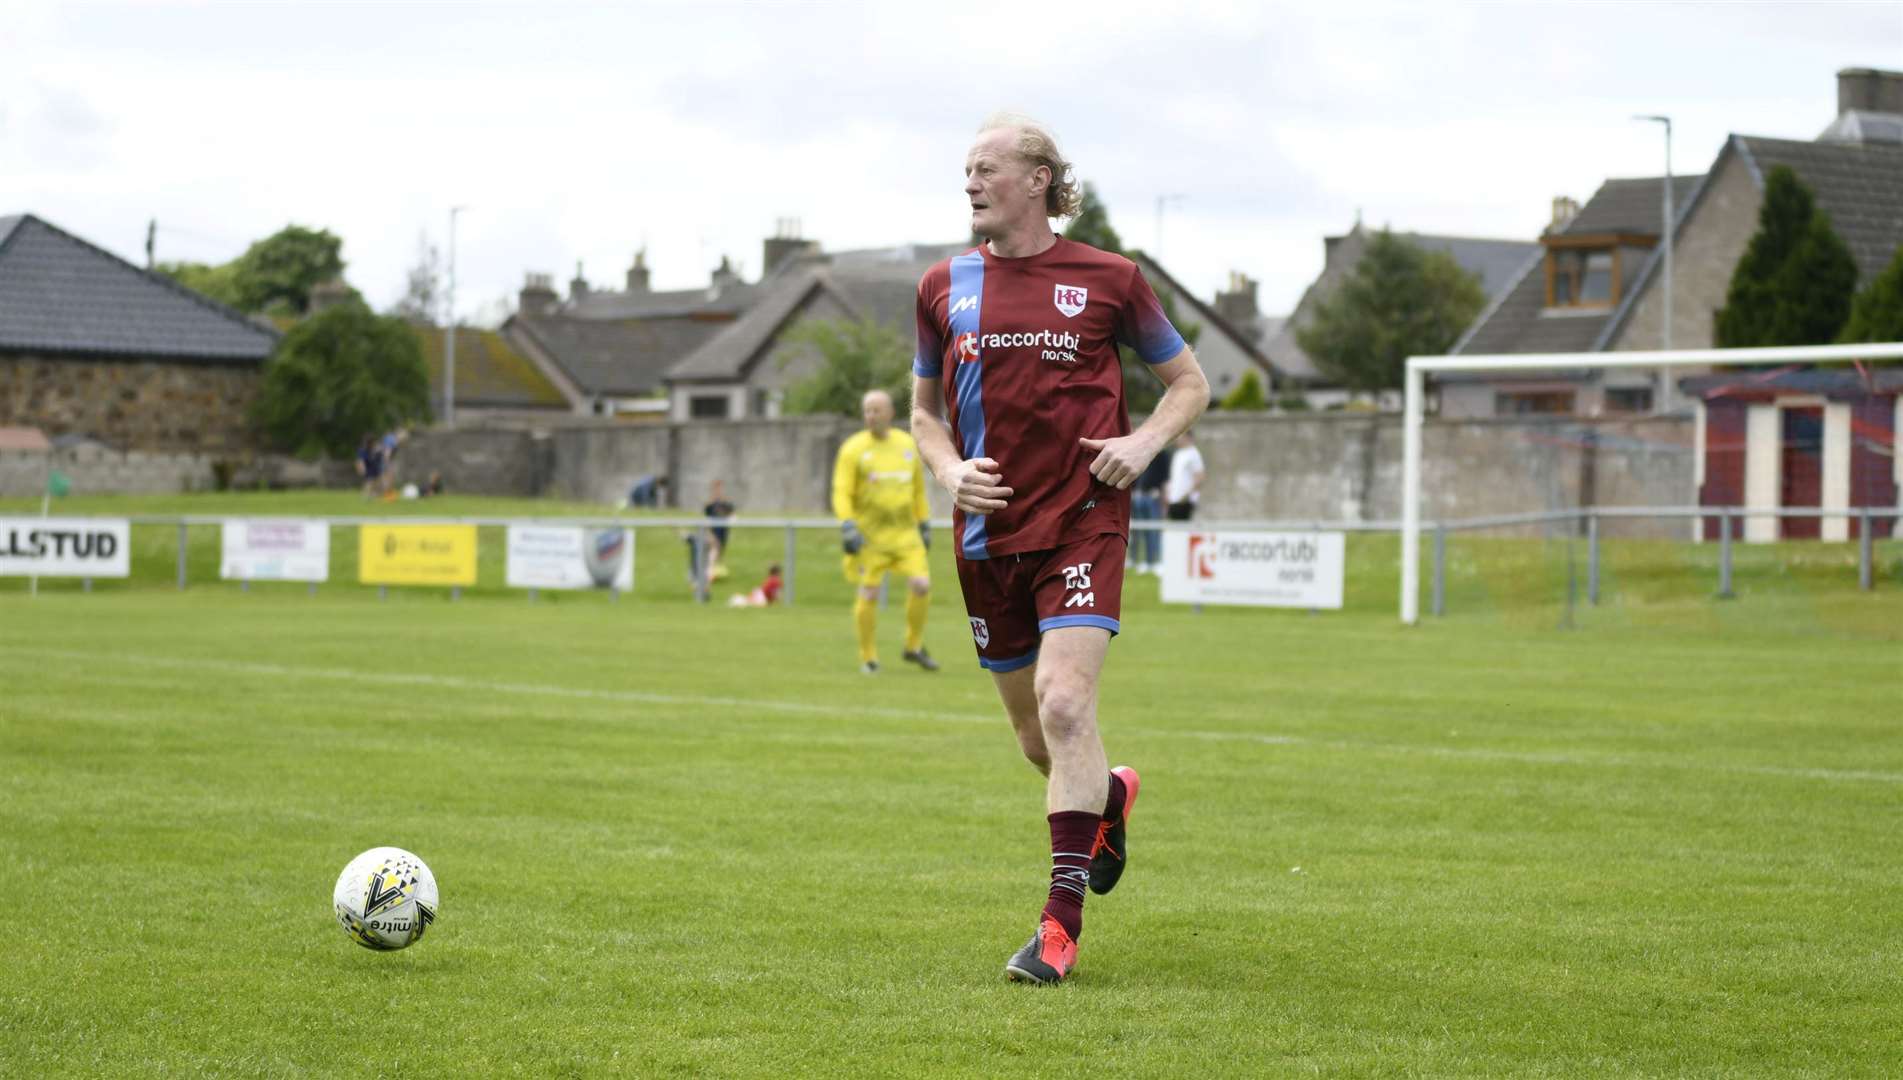 Colin Hendry captained the side to a dominant 8-0 victory. Picture: Becky Saunderson